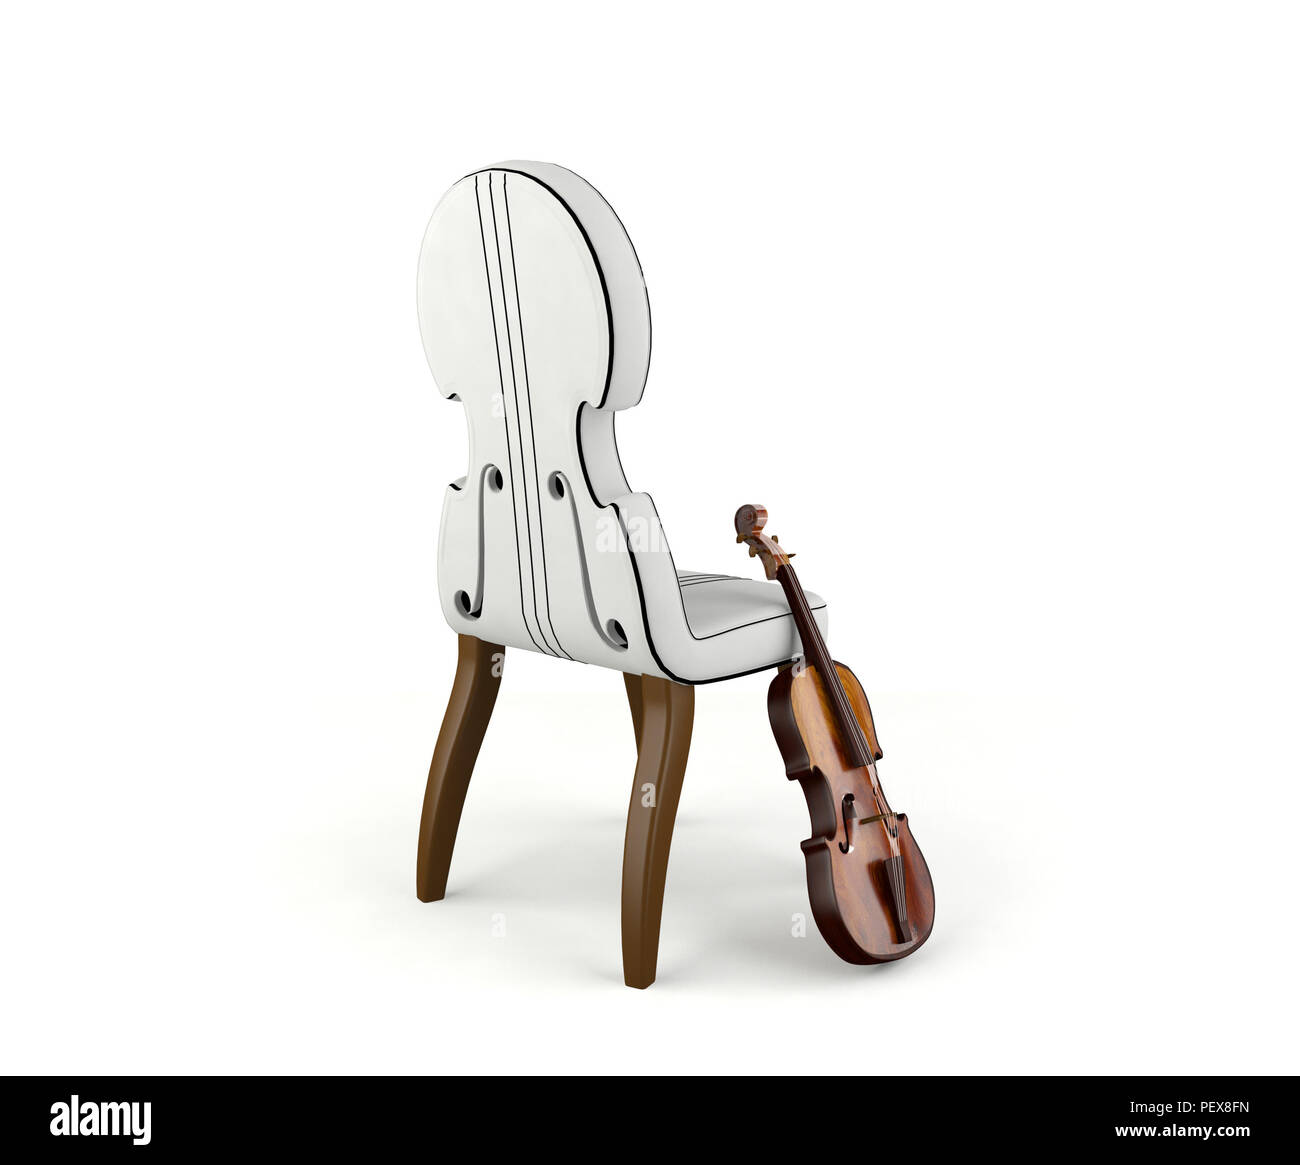 Violin and violin concept chair Stock Photo